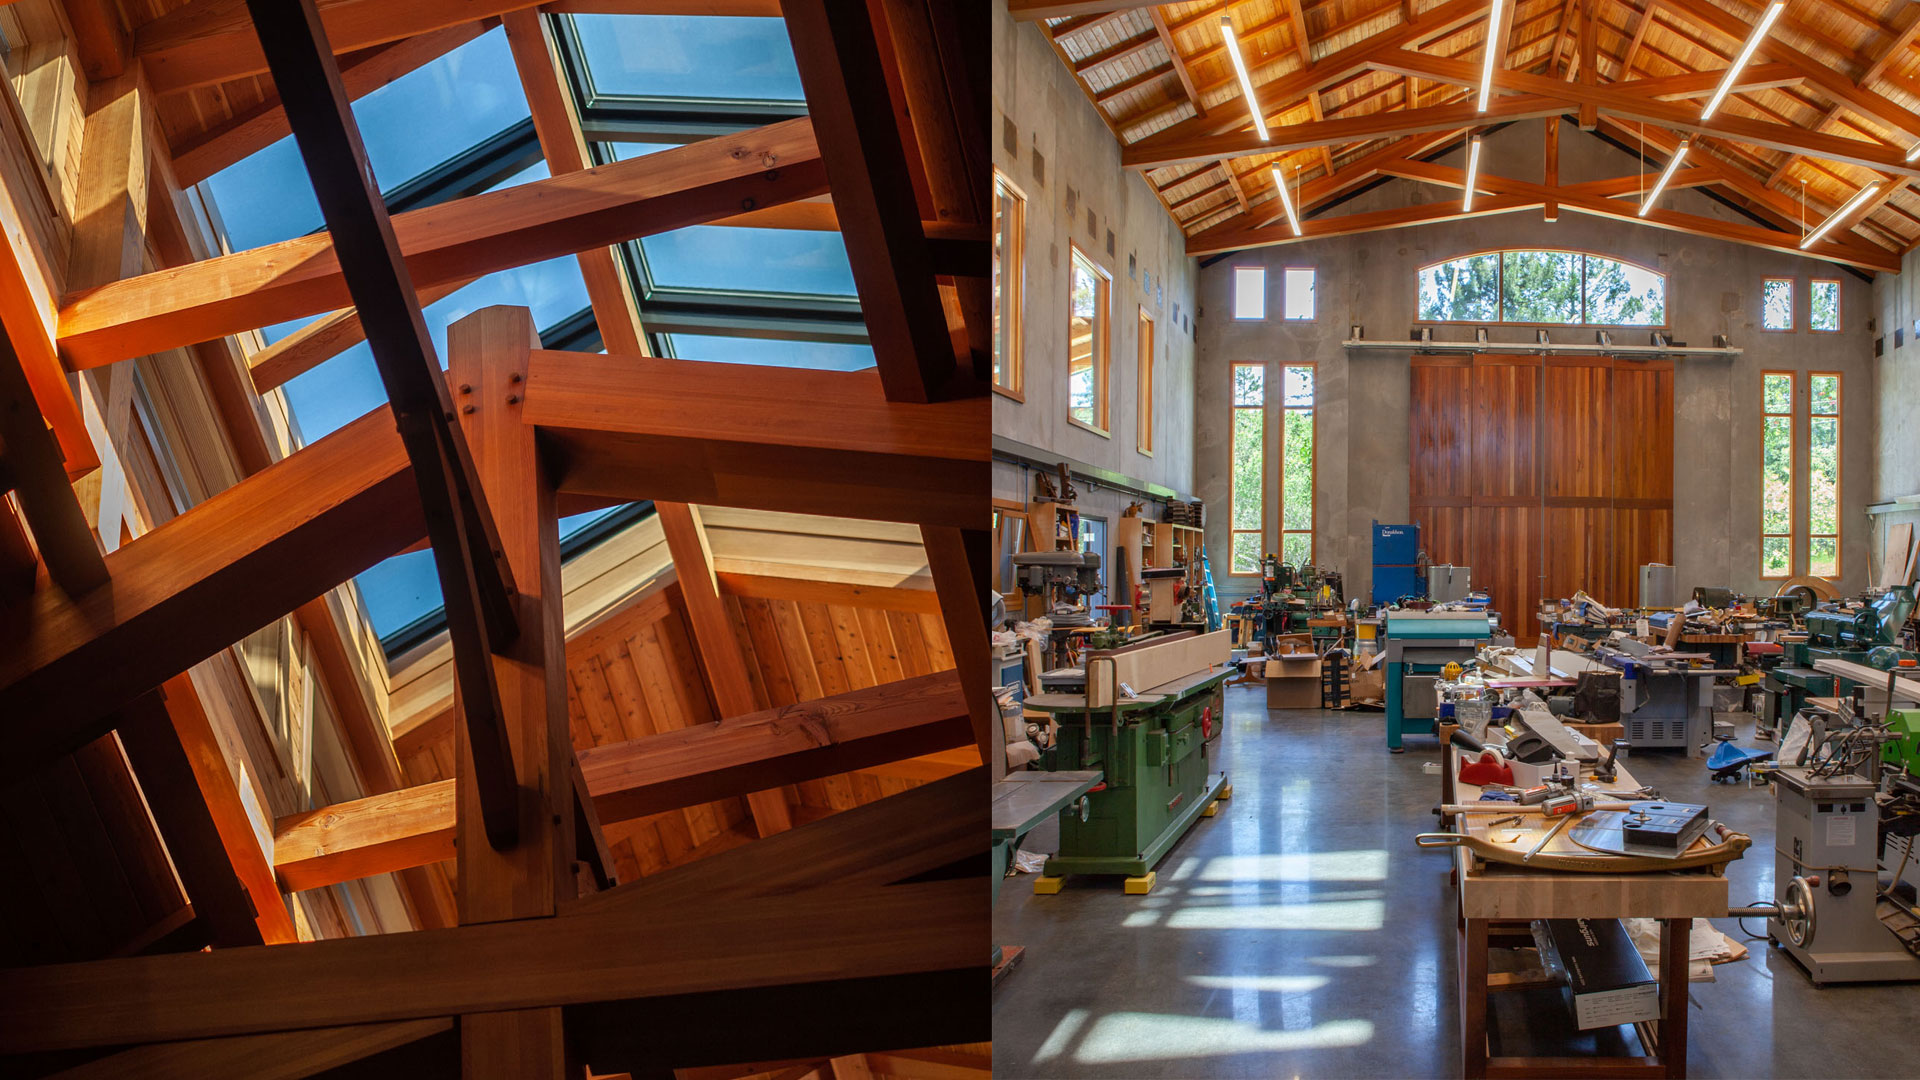 Double image, looking up at the wooden truss with skylight above, and interior of shop with assorted tools.